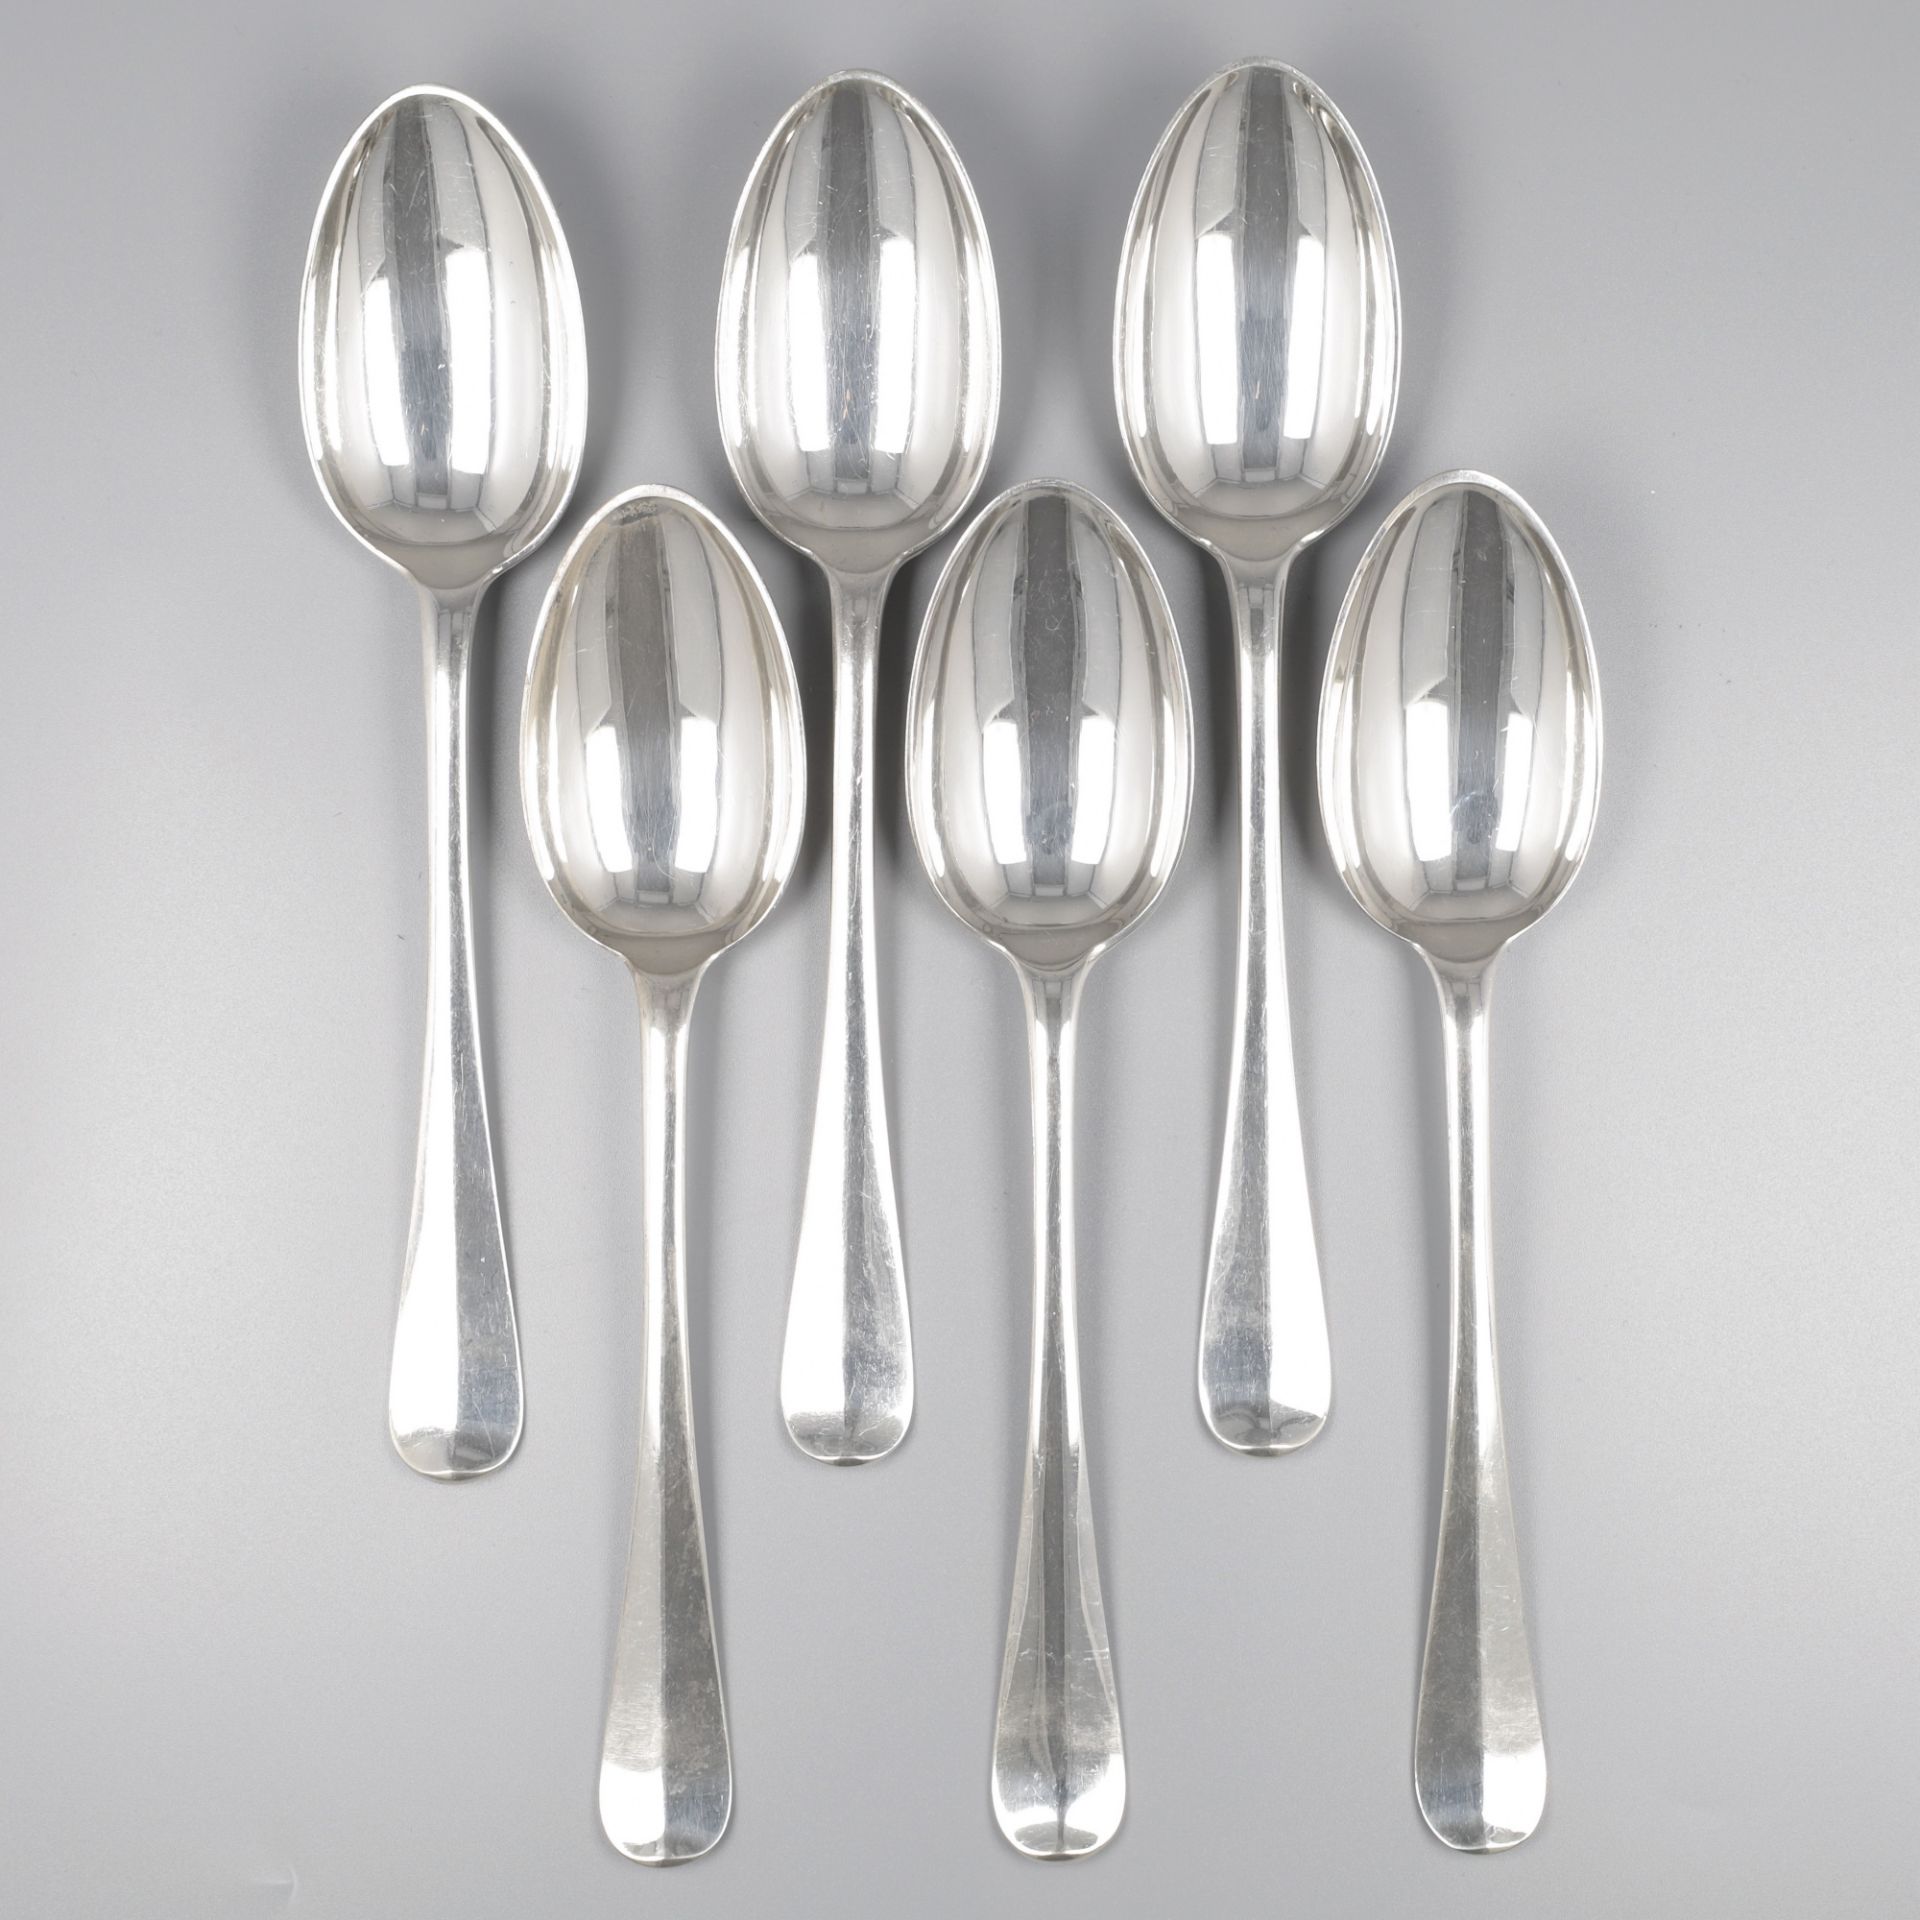 6-piece set of dinner spoons "Haags Lofje" silver.
